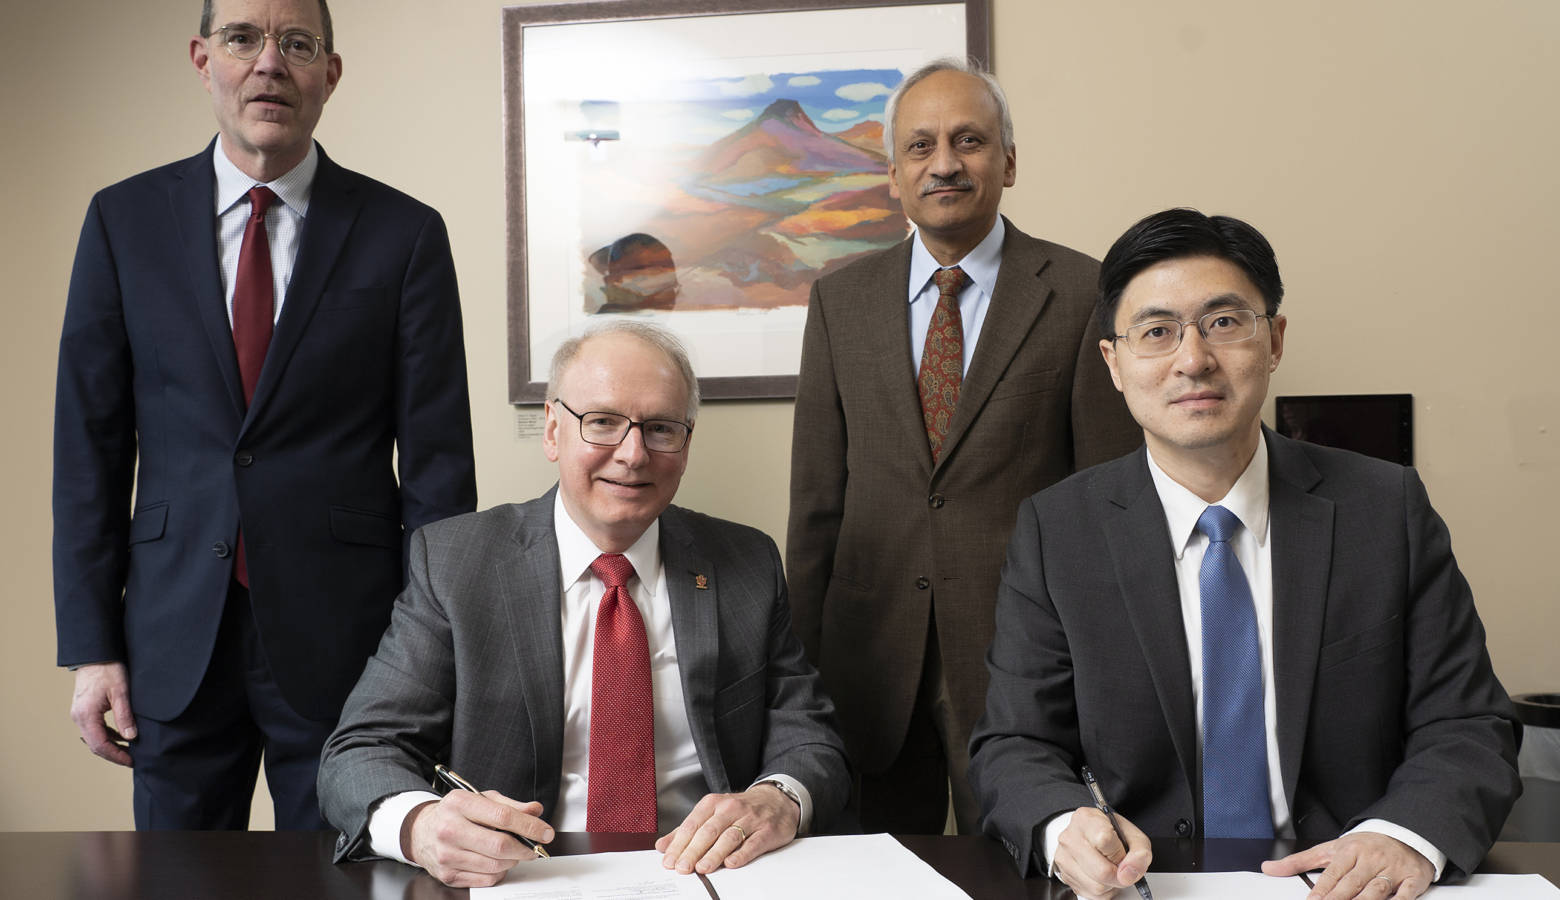 Leaders from Indiana University School of Medicine and Purdue University’s College of Engineering sign a memorandum of understanding to formalize the partnership. (Photo provided by Purdue University)